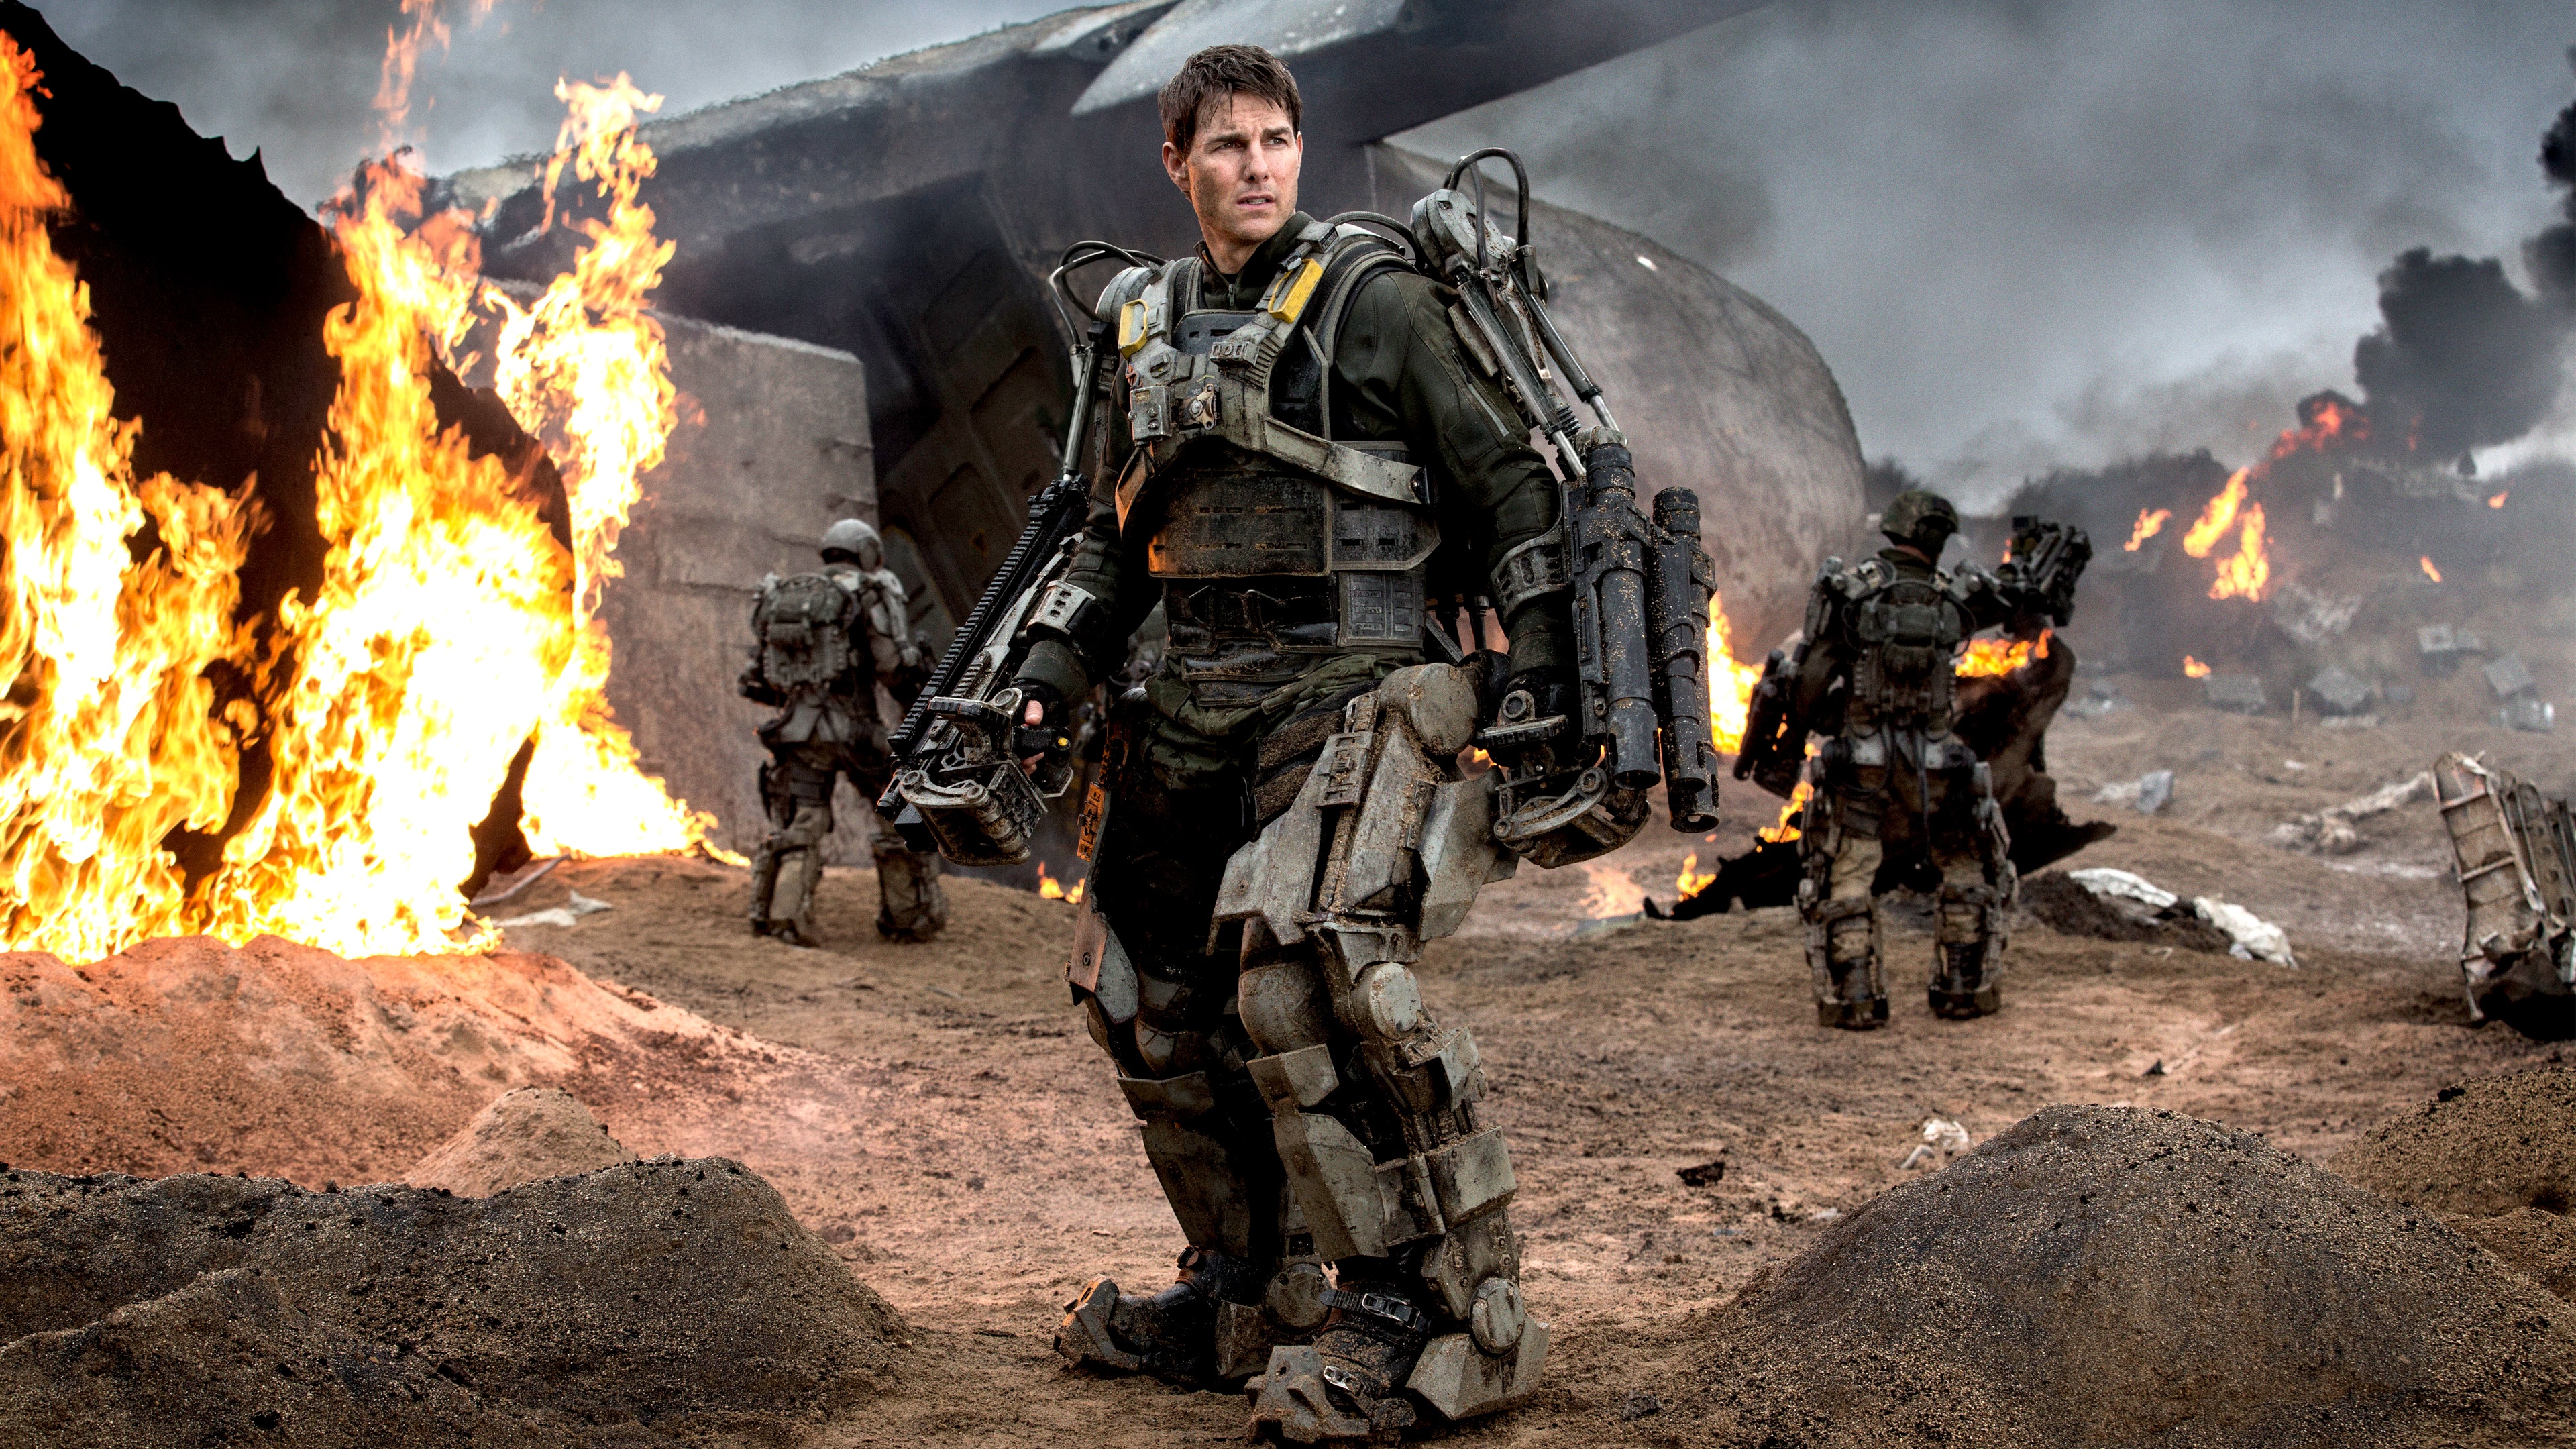 Wallpapers the brink of the future tom cruise soldiers on the desktop